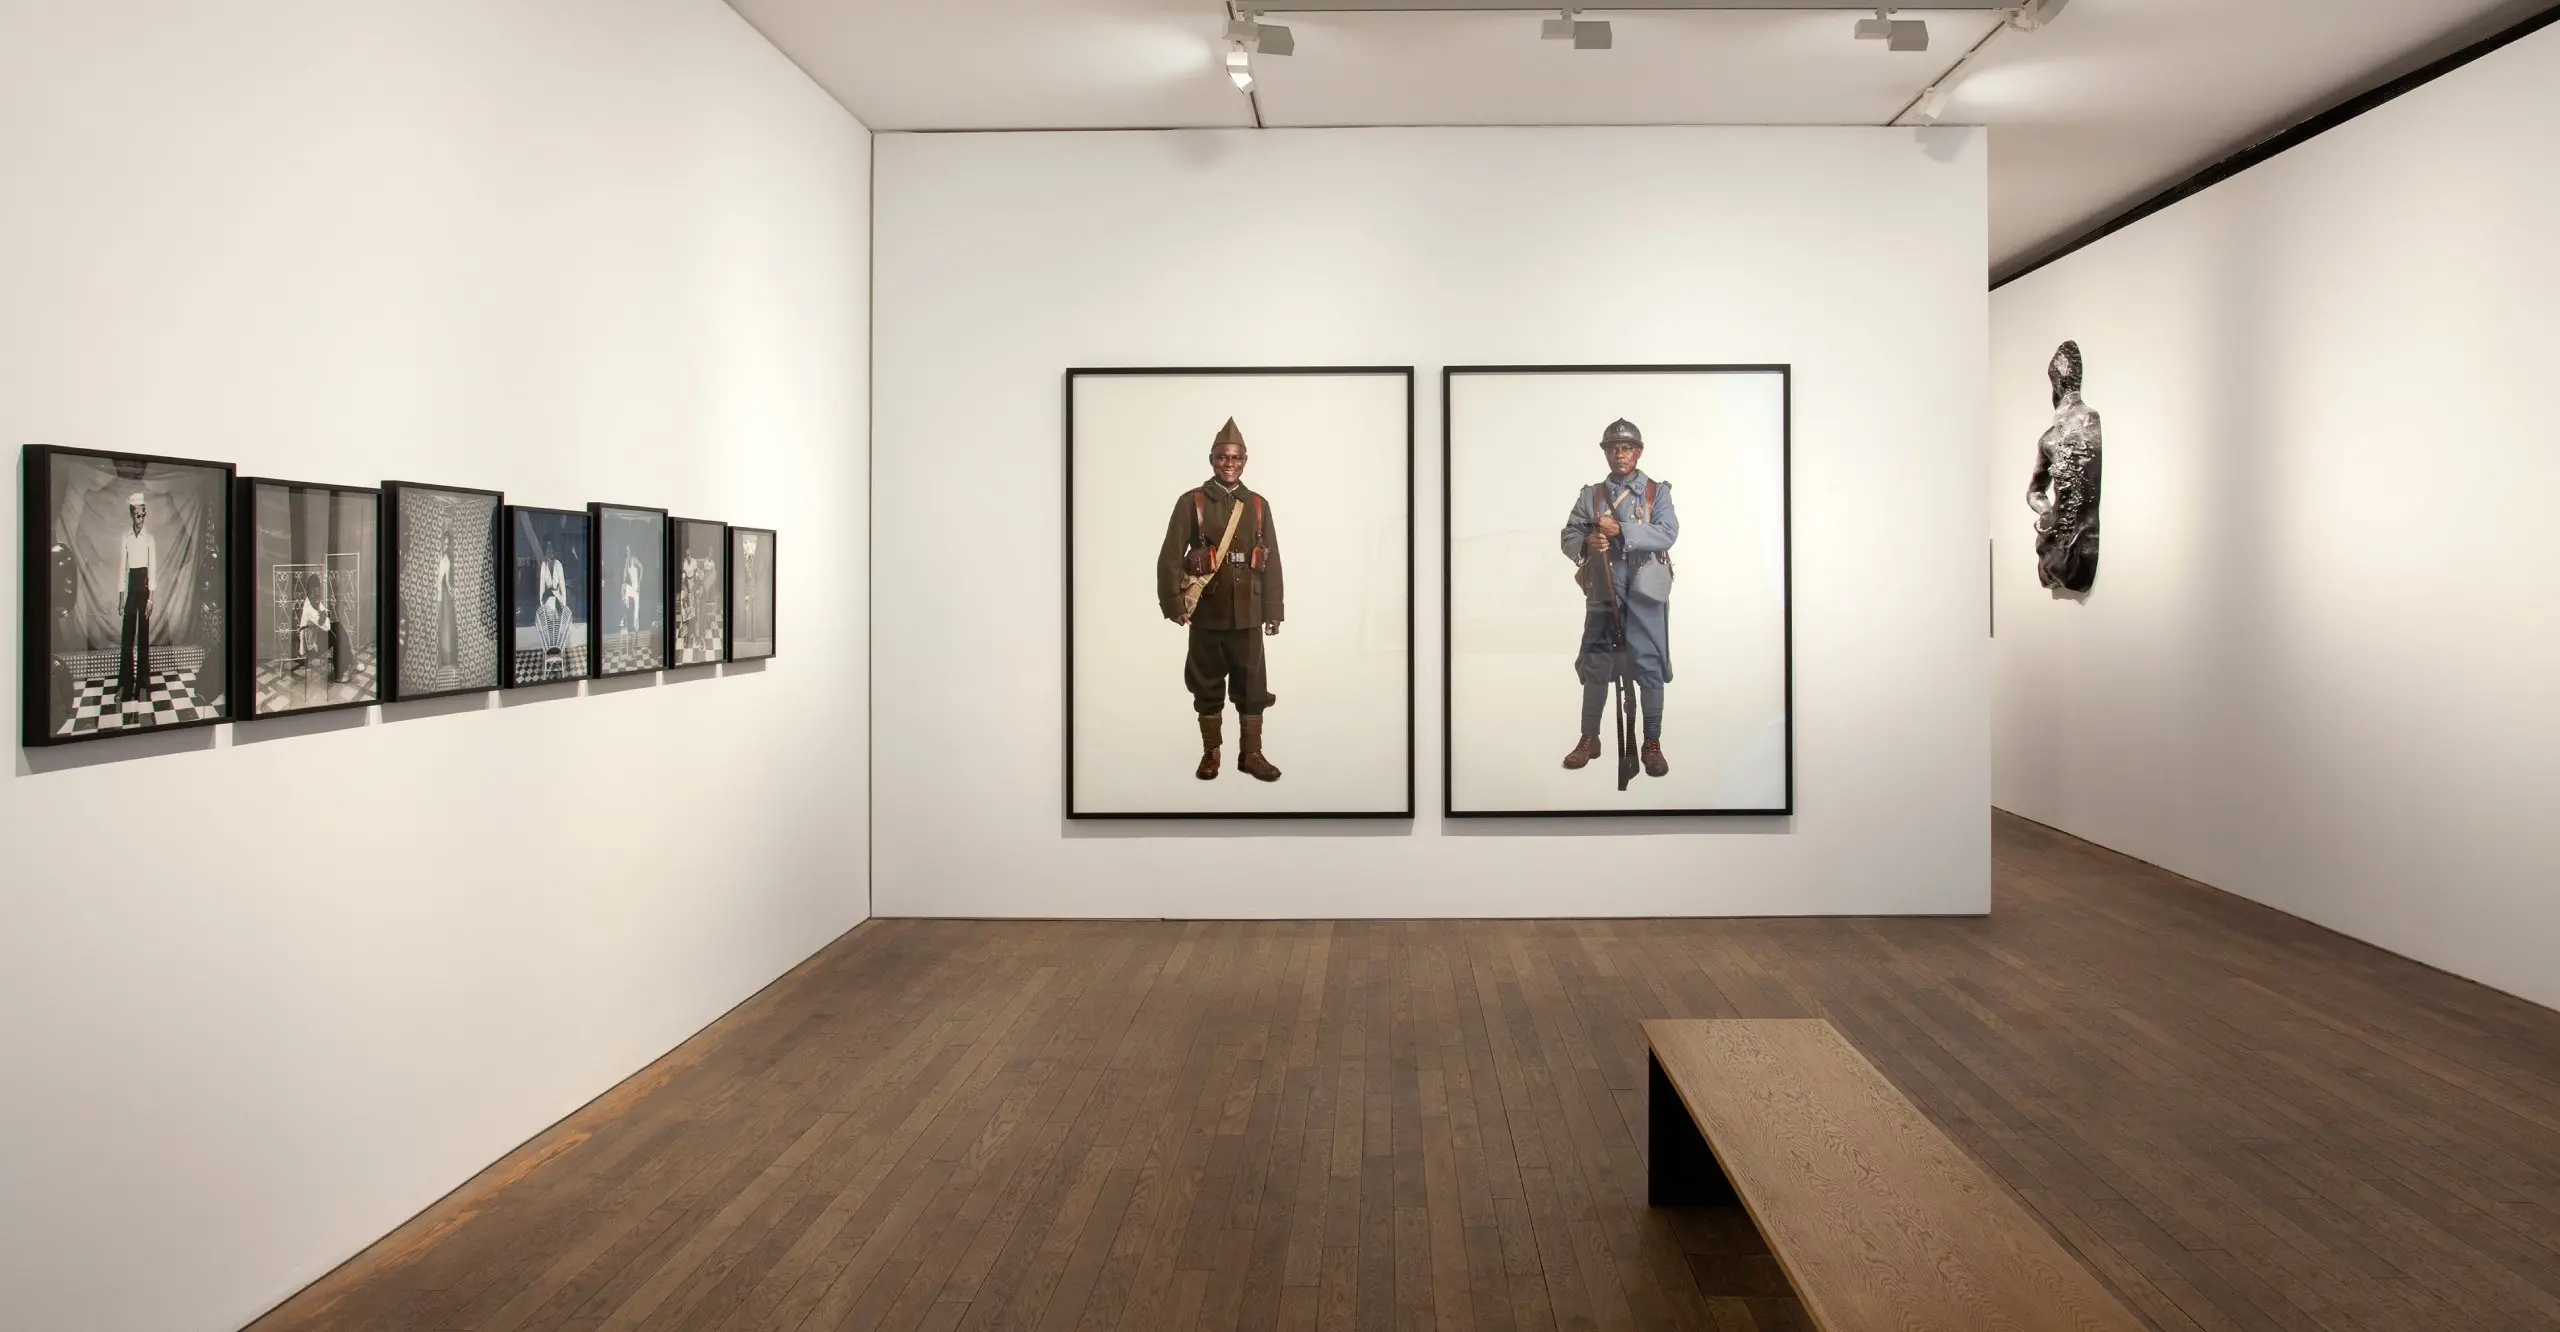 Colour photograph of Gallery interior with large framed portrait photographs on the wall